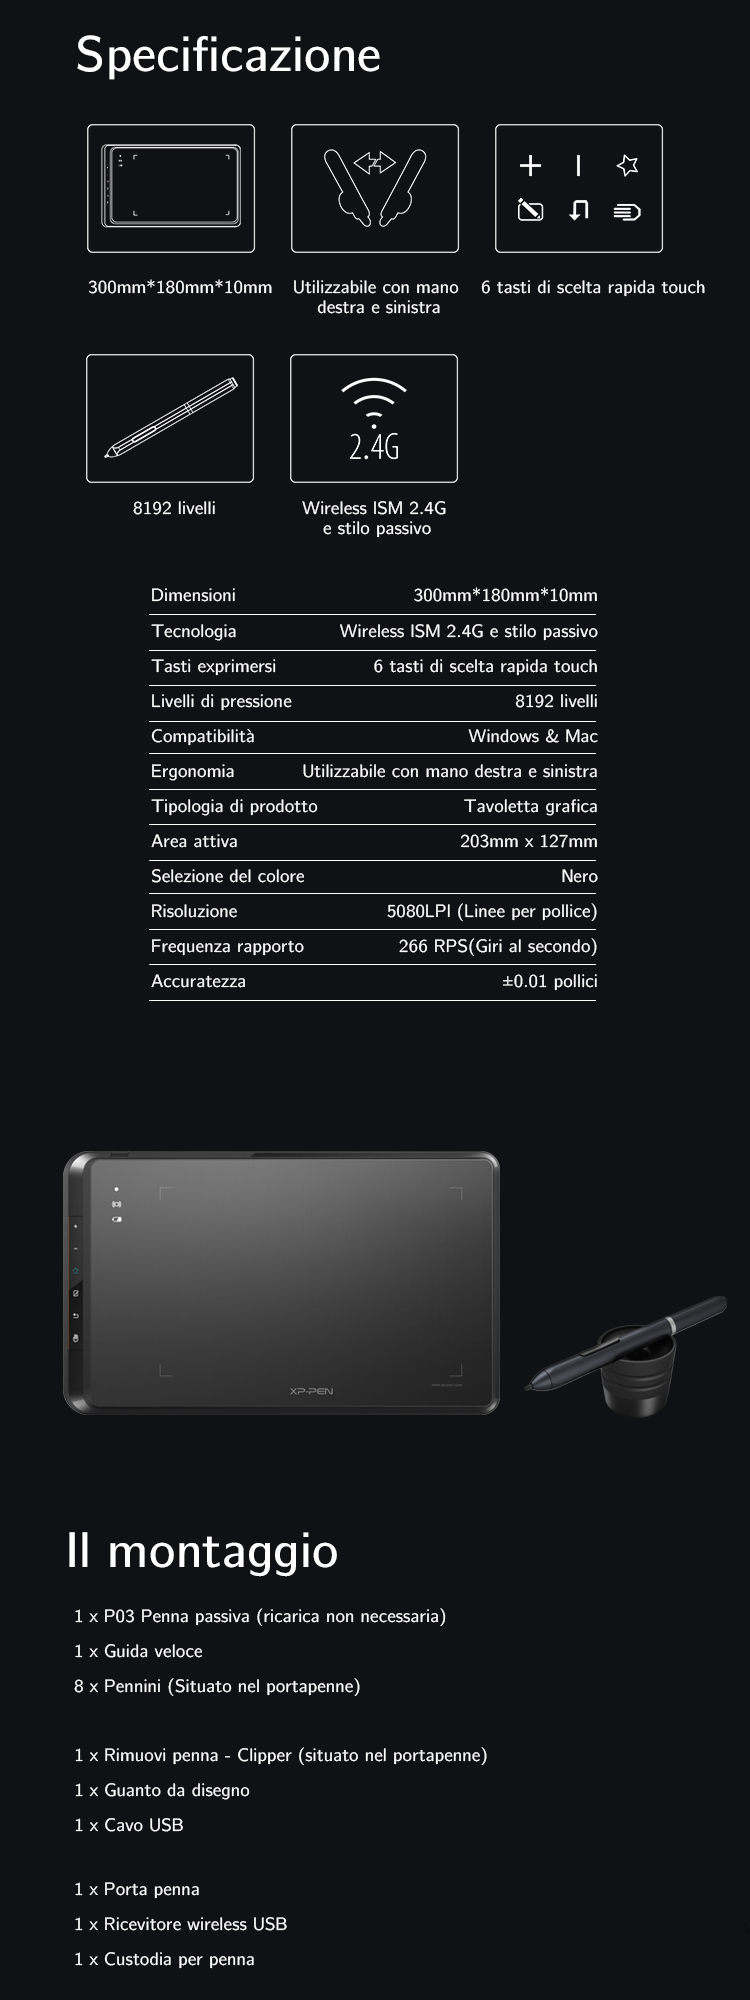 Specifications and fitting of XP-Pen Star 05 wireless drawing tablet